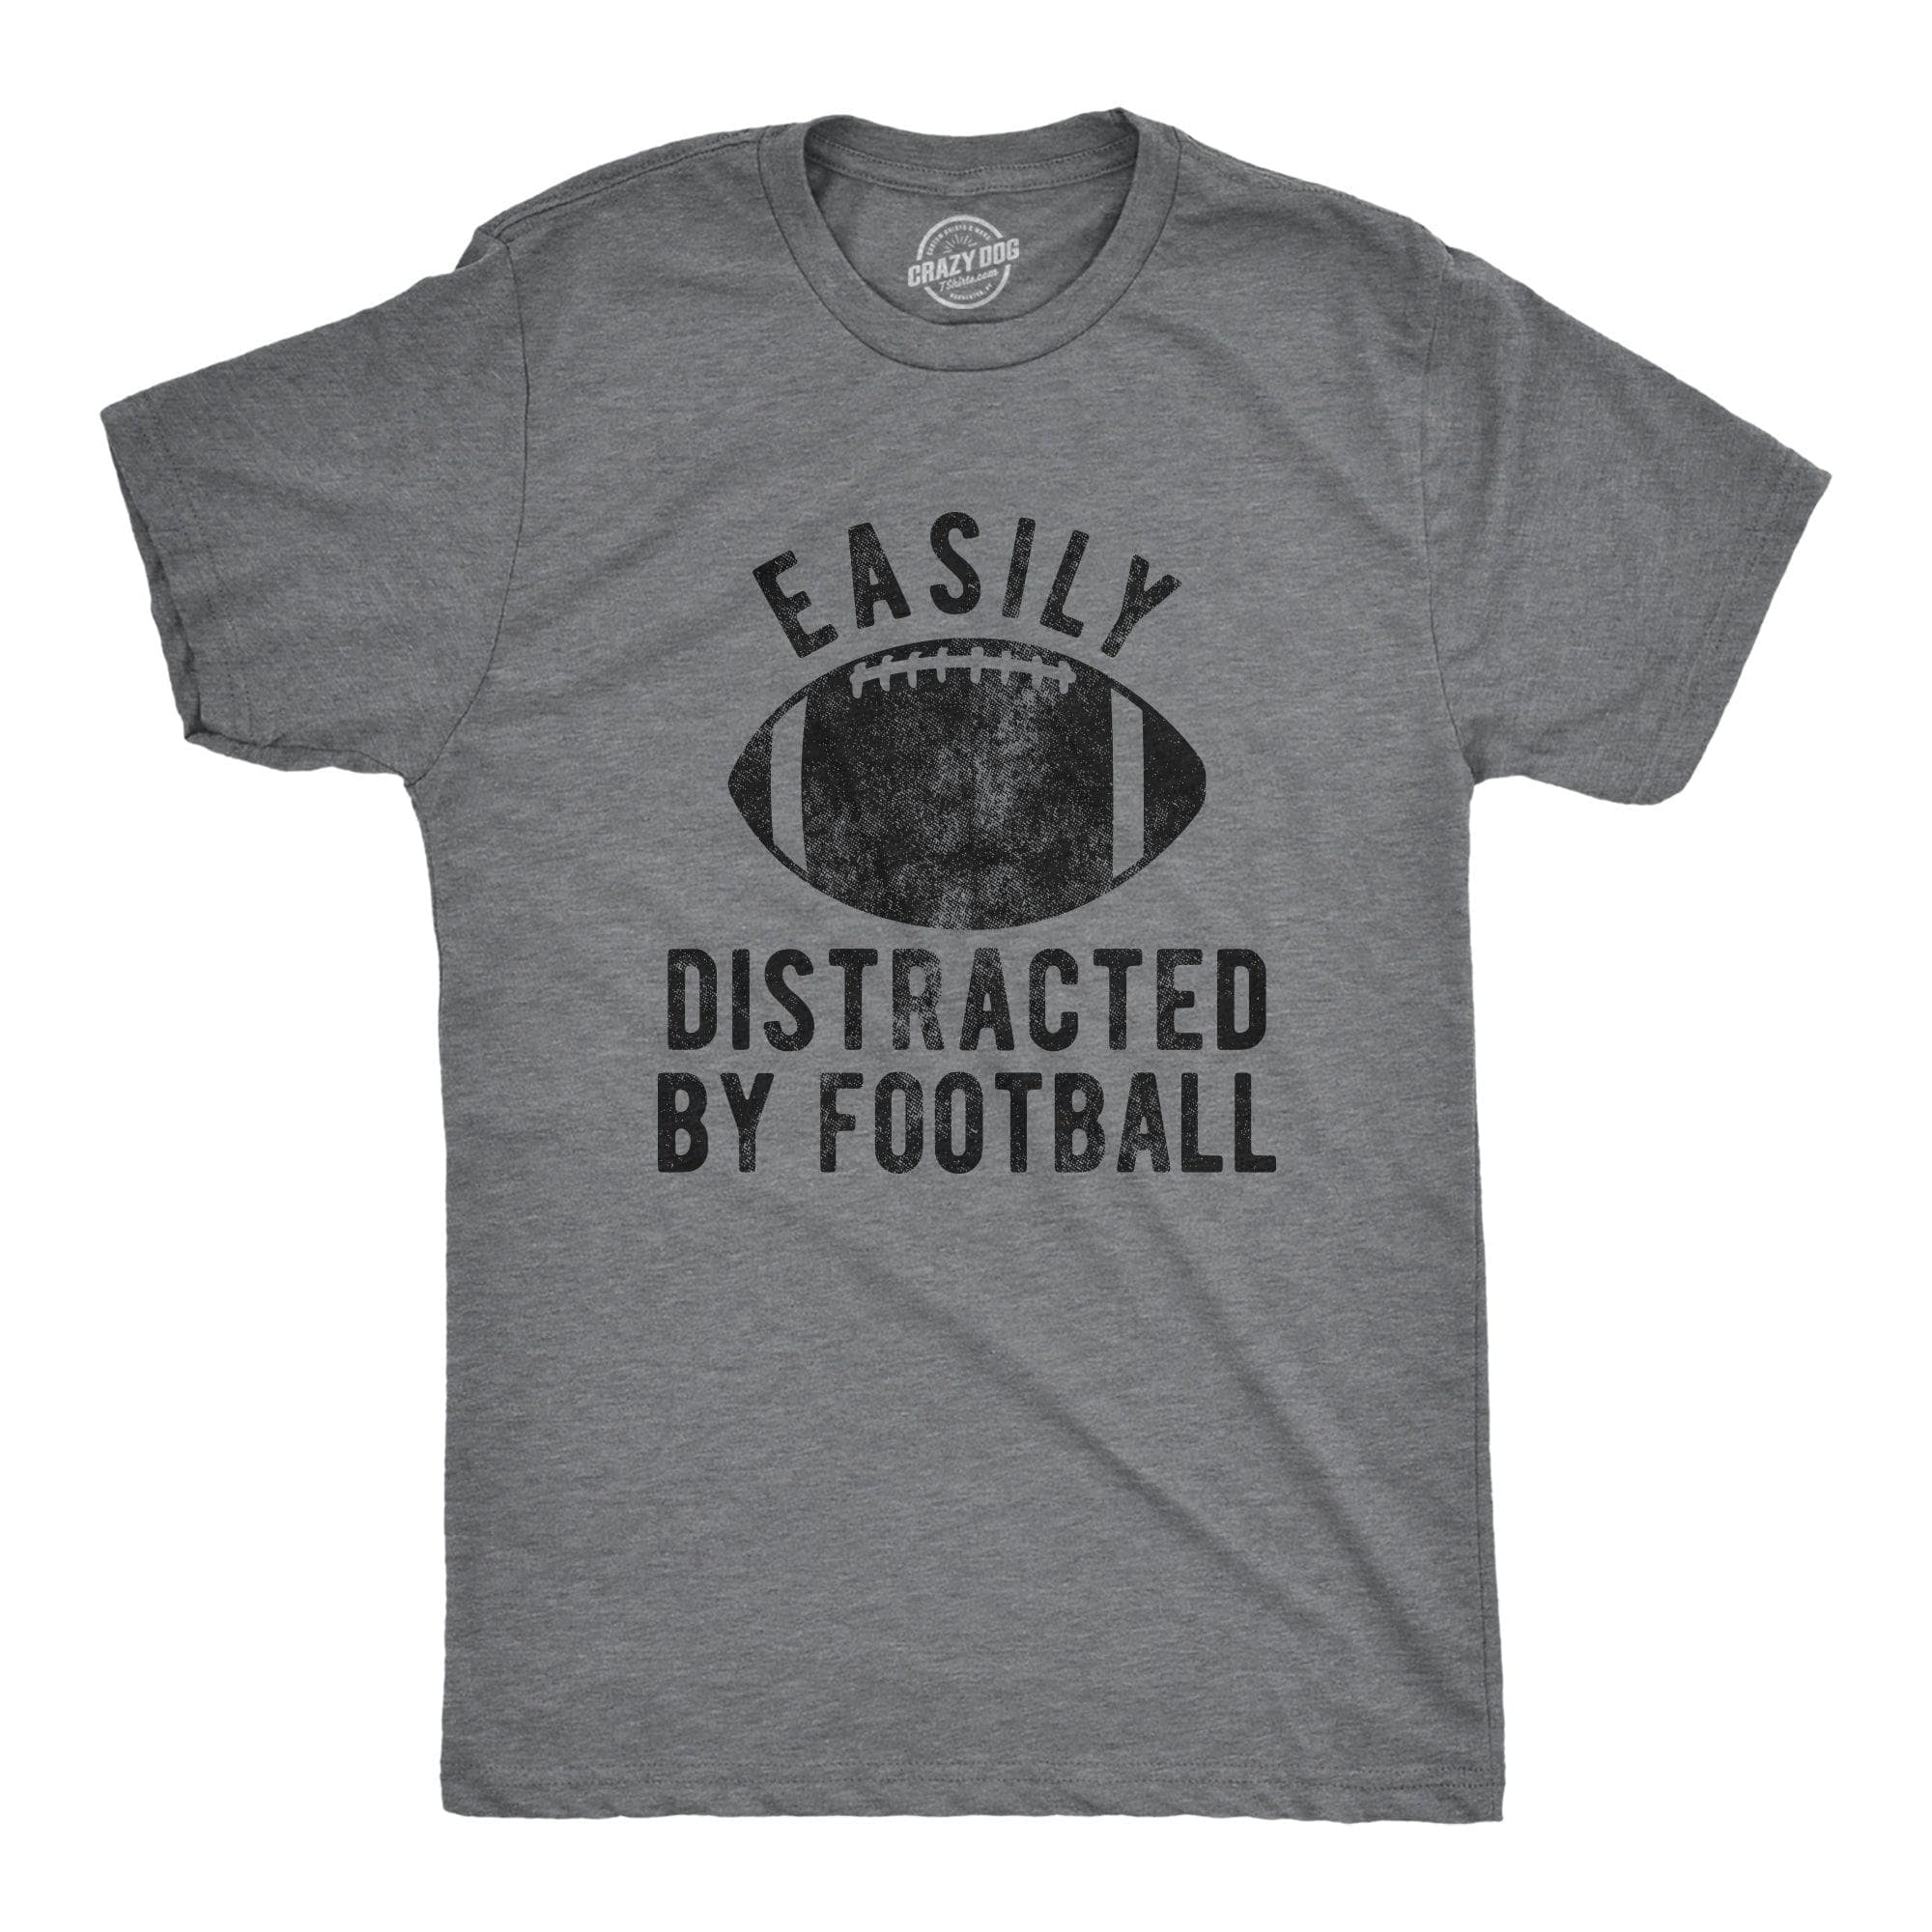 Easily Distracted By Football Men's Tshirt  -  Crazy Dog T-Shirts